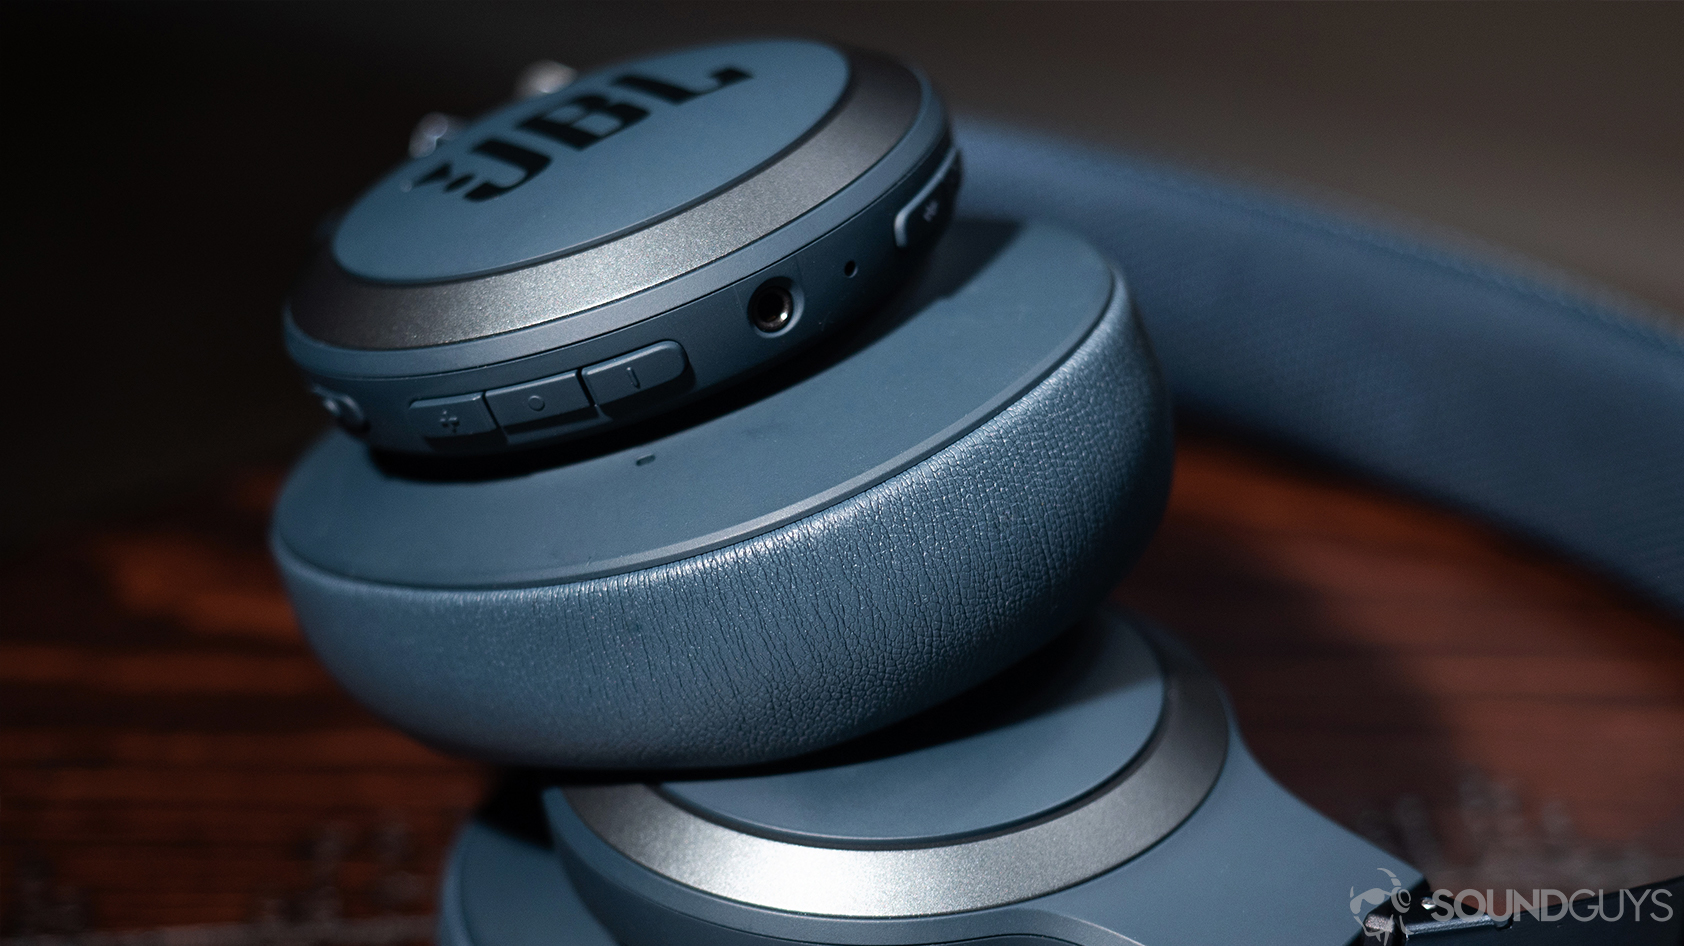 A picture of the JBL Live 650BTNC noise canceling headphones' on-board controls and 3.5mm aux input.